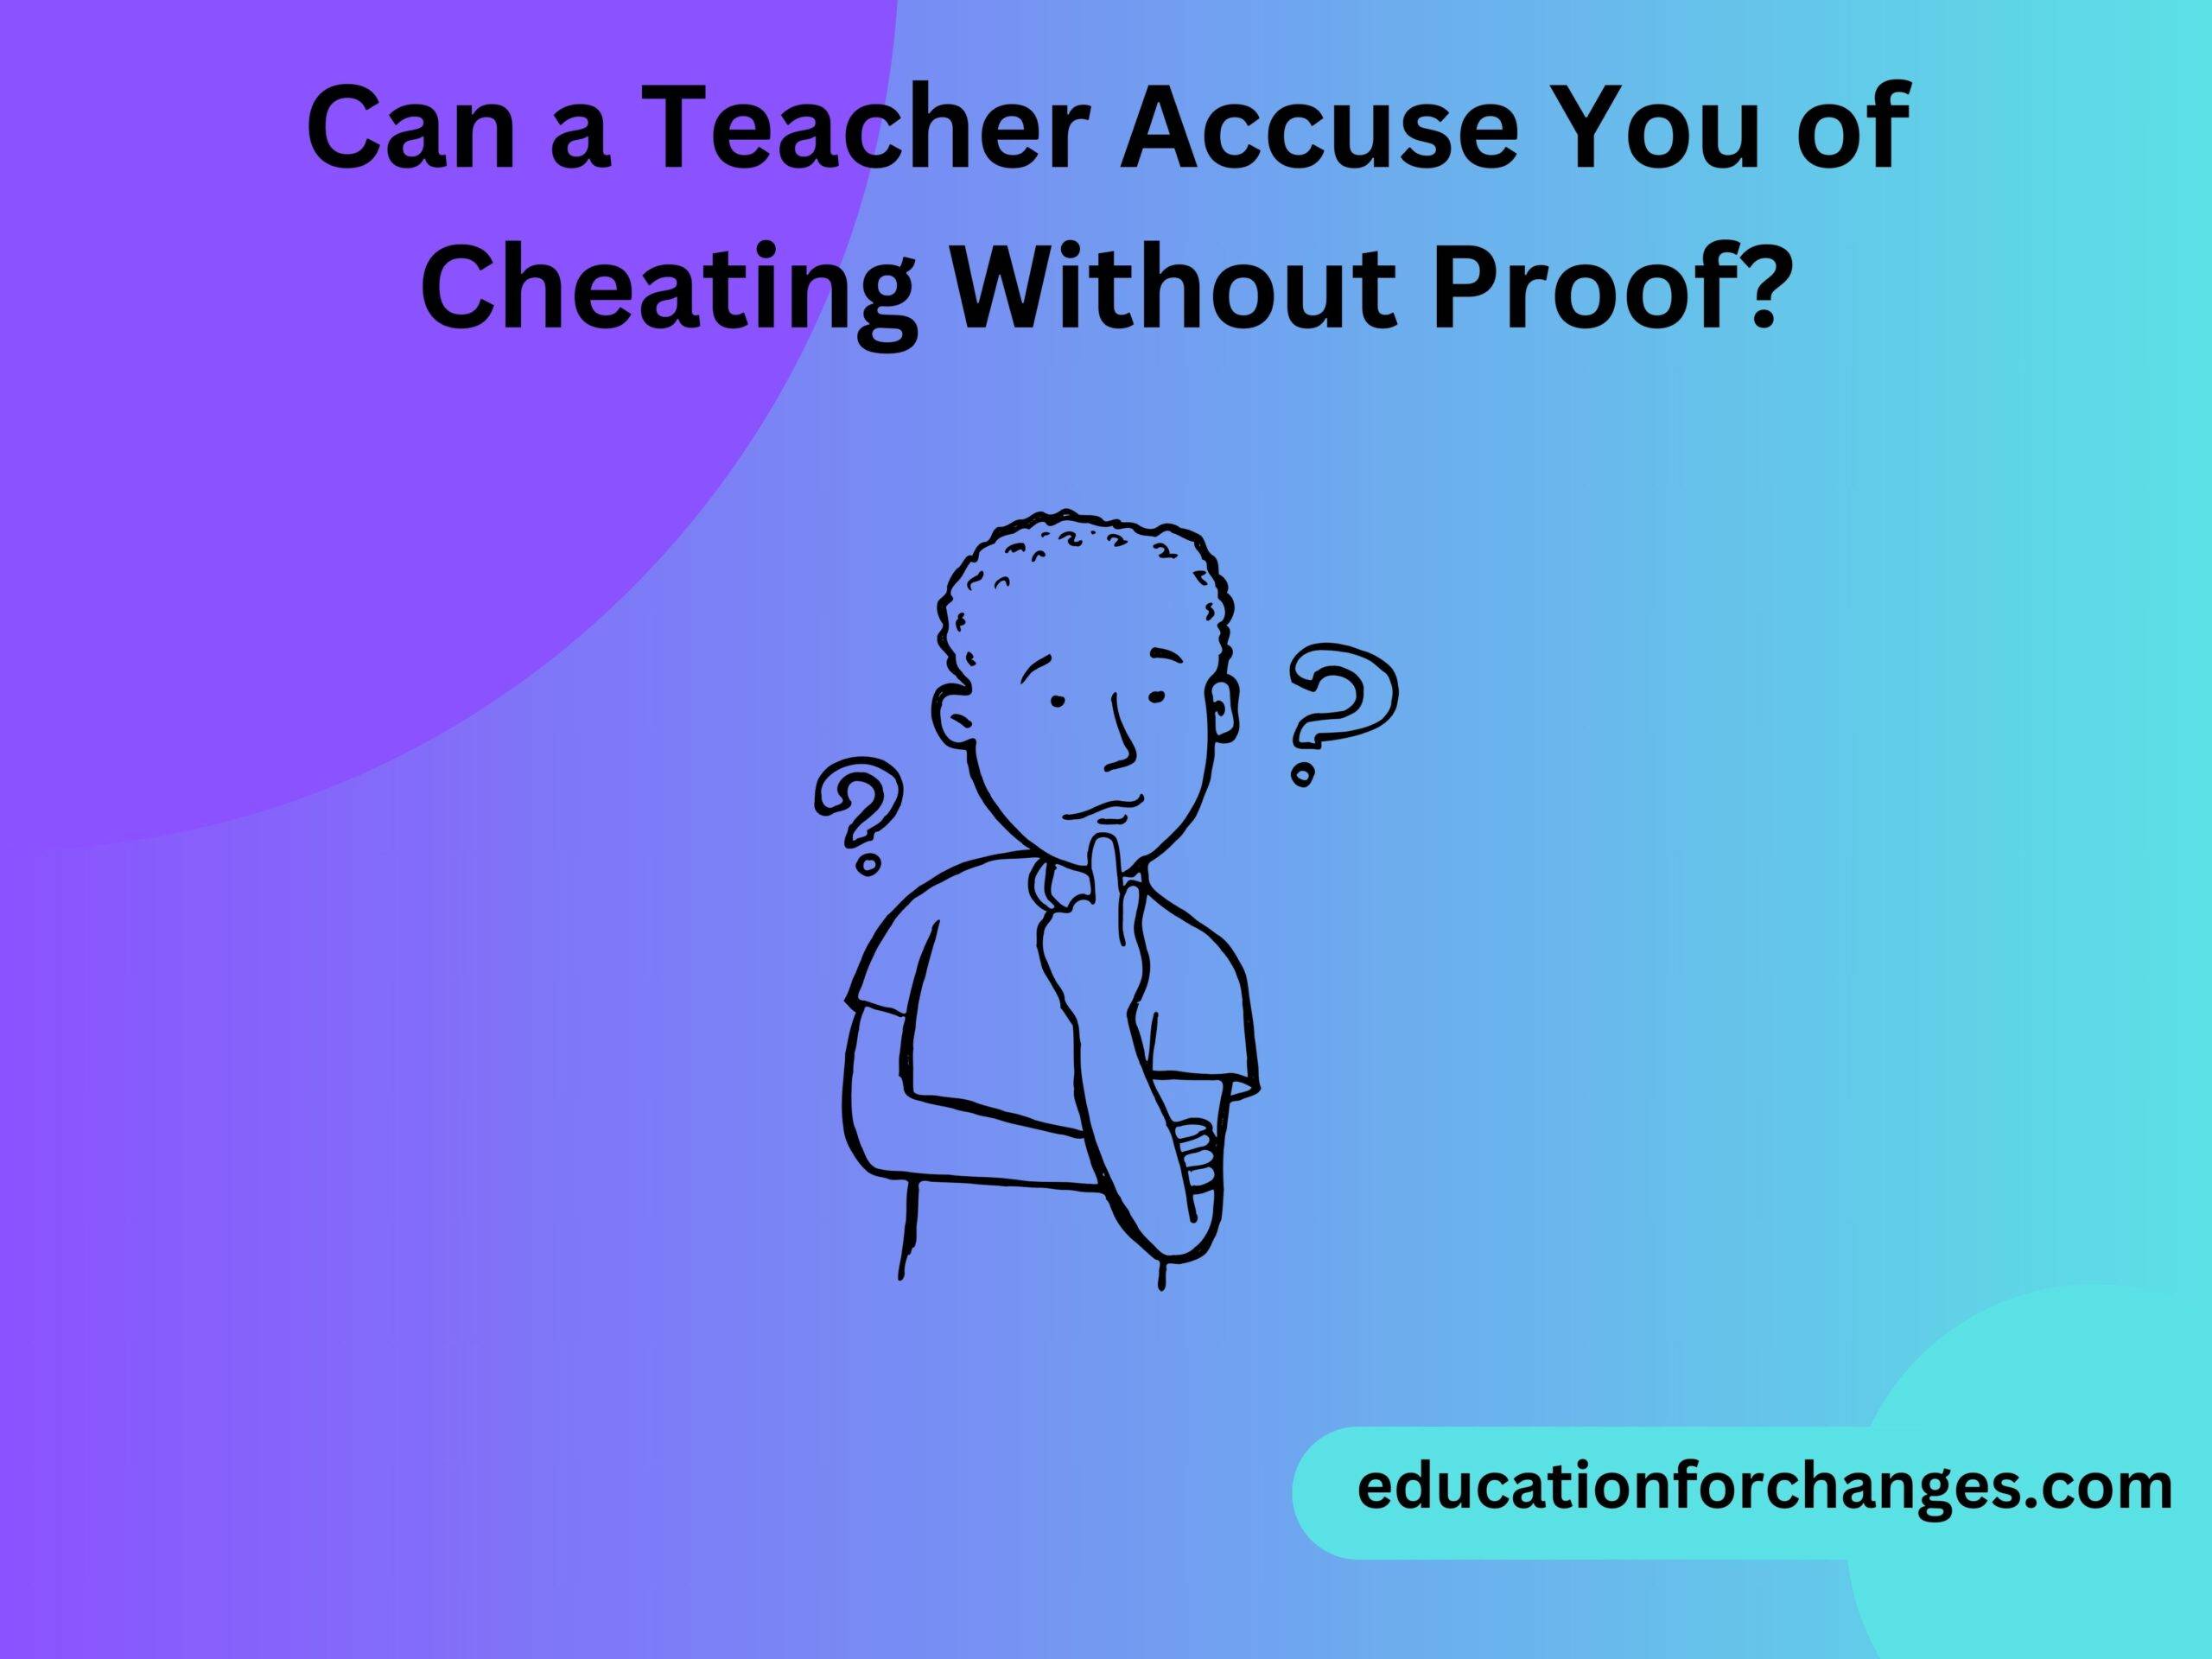 Can a Teacher Accuse You of Cheating Without Proof